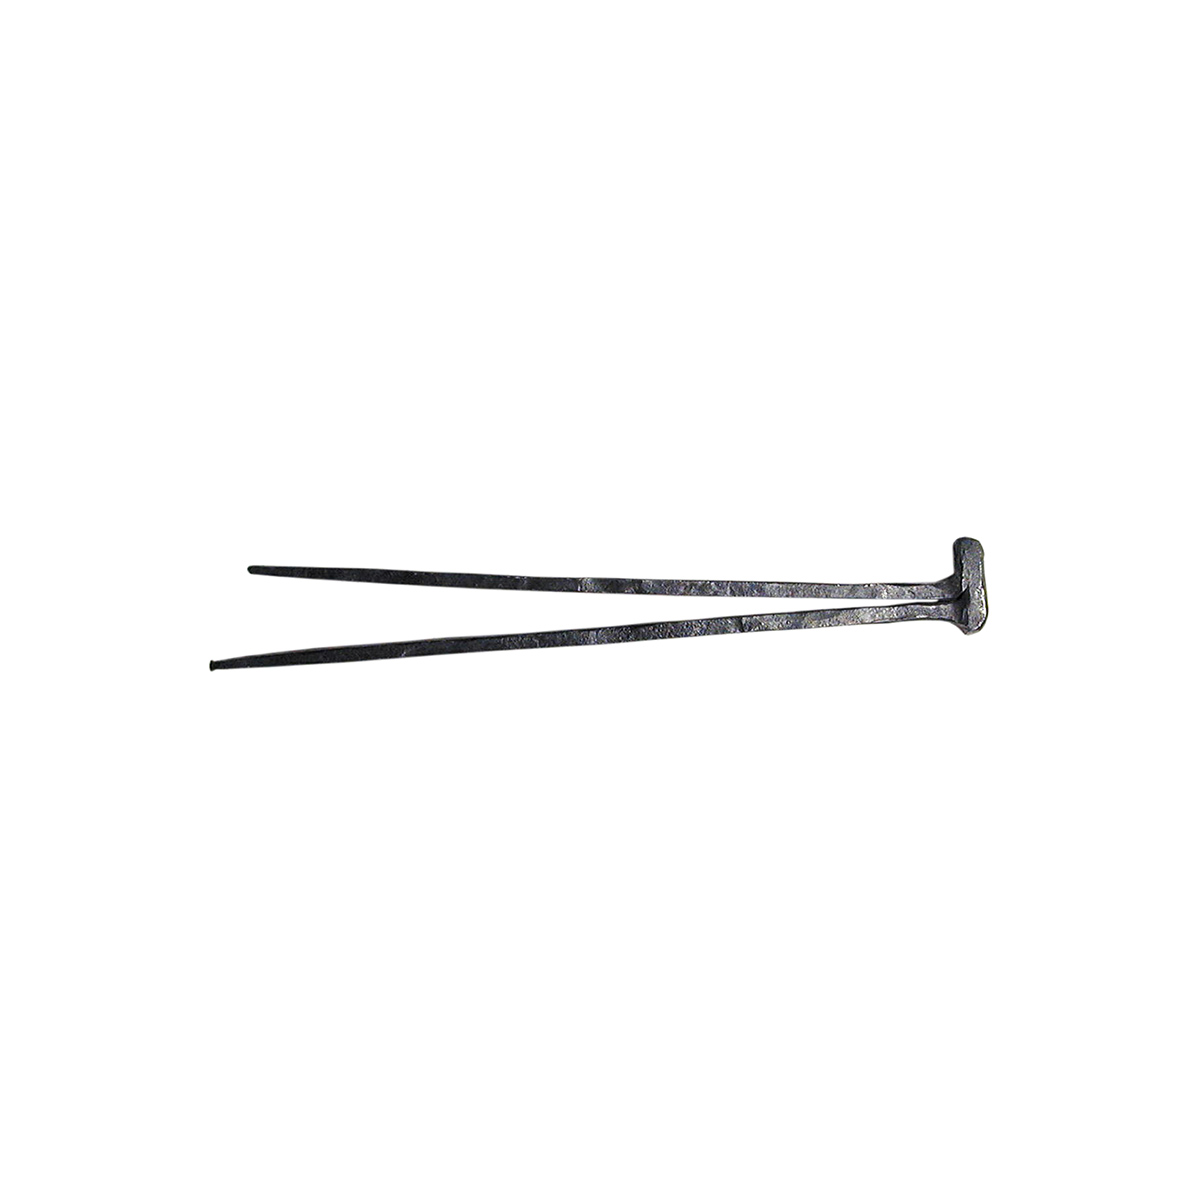 Hand Forged Iron Square Head Split Nail 